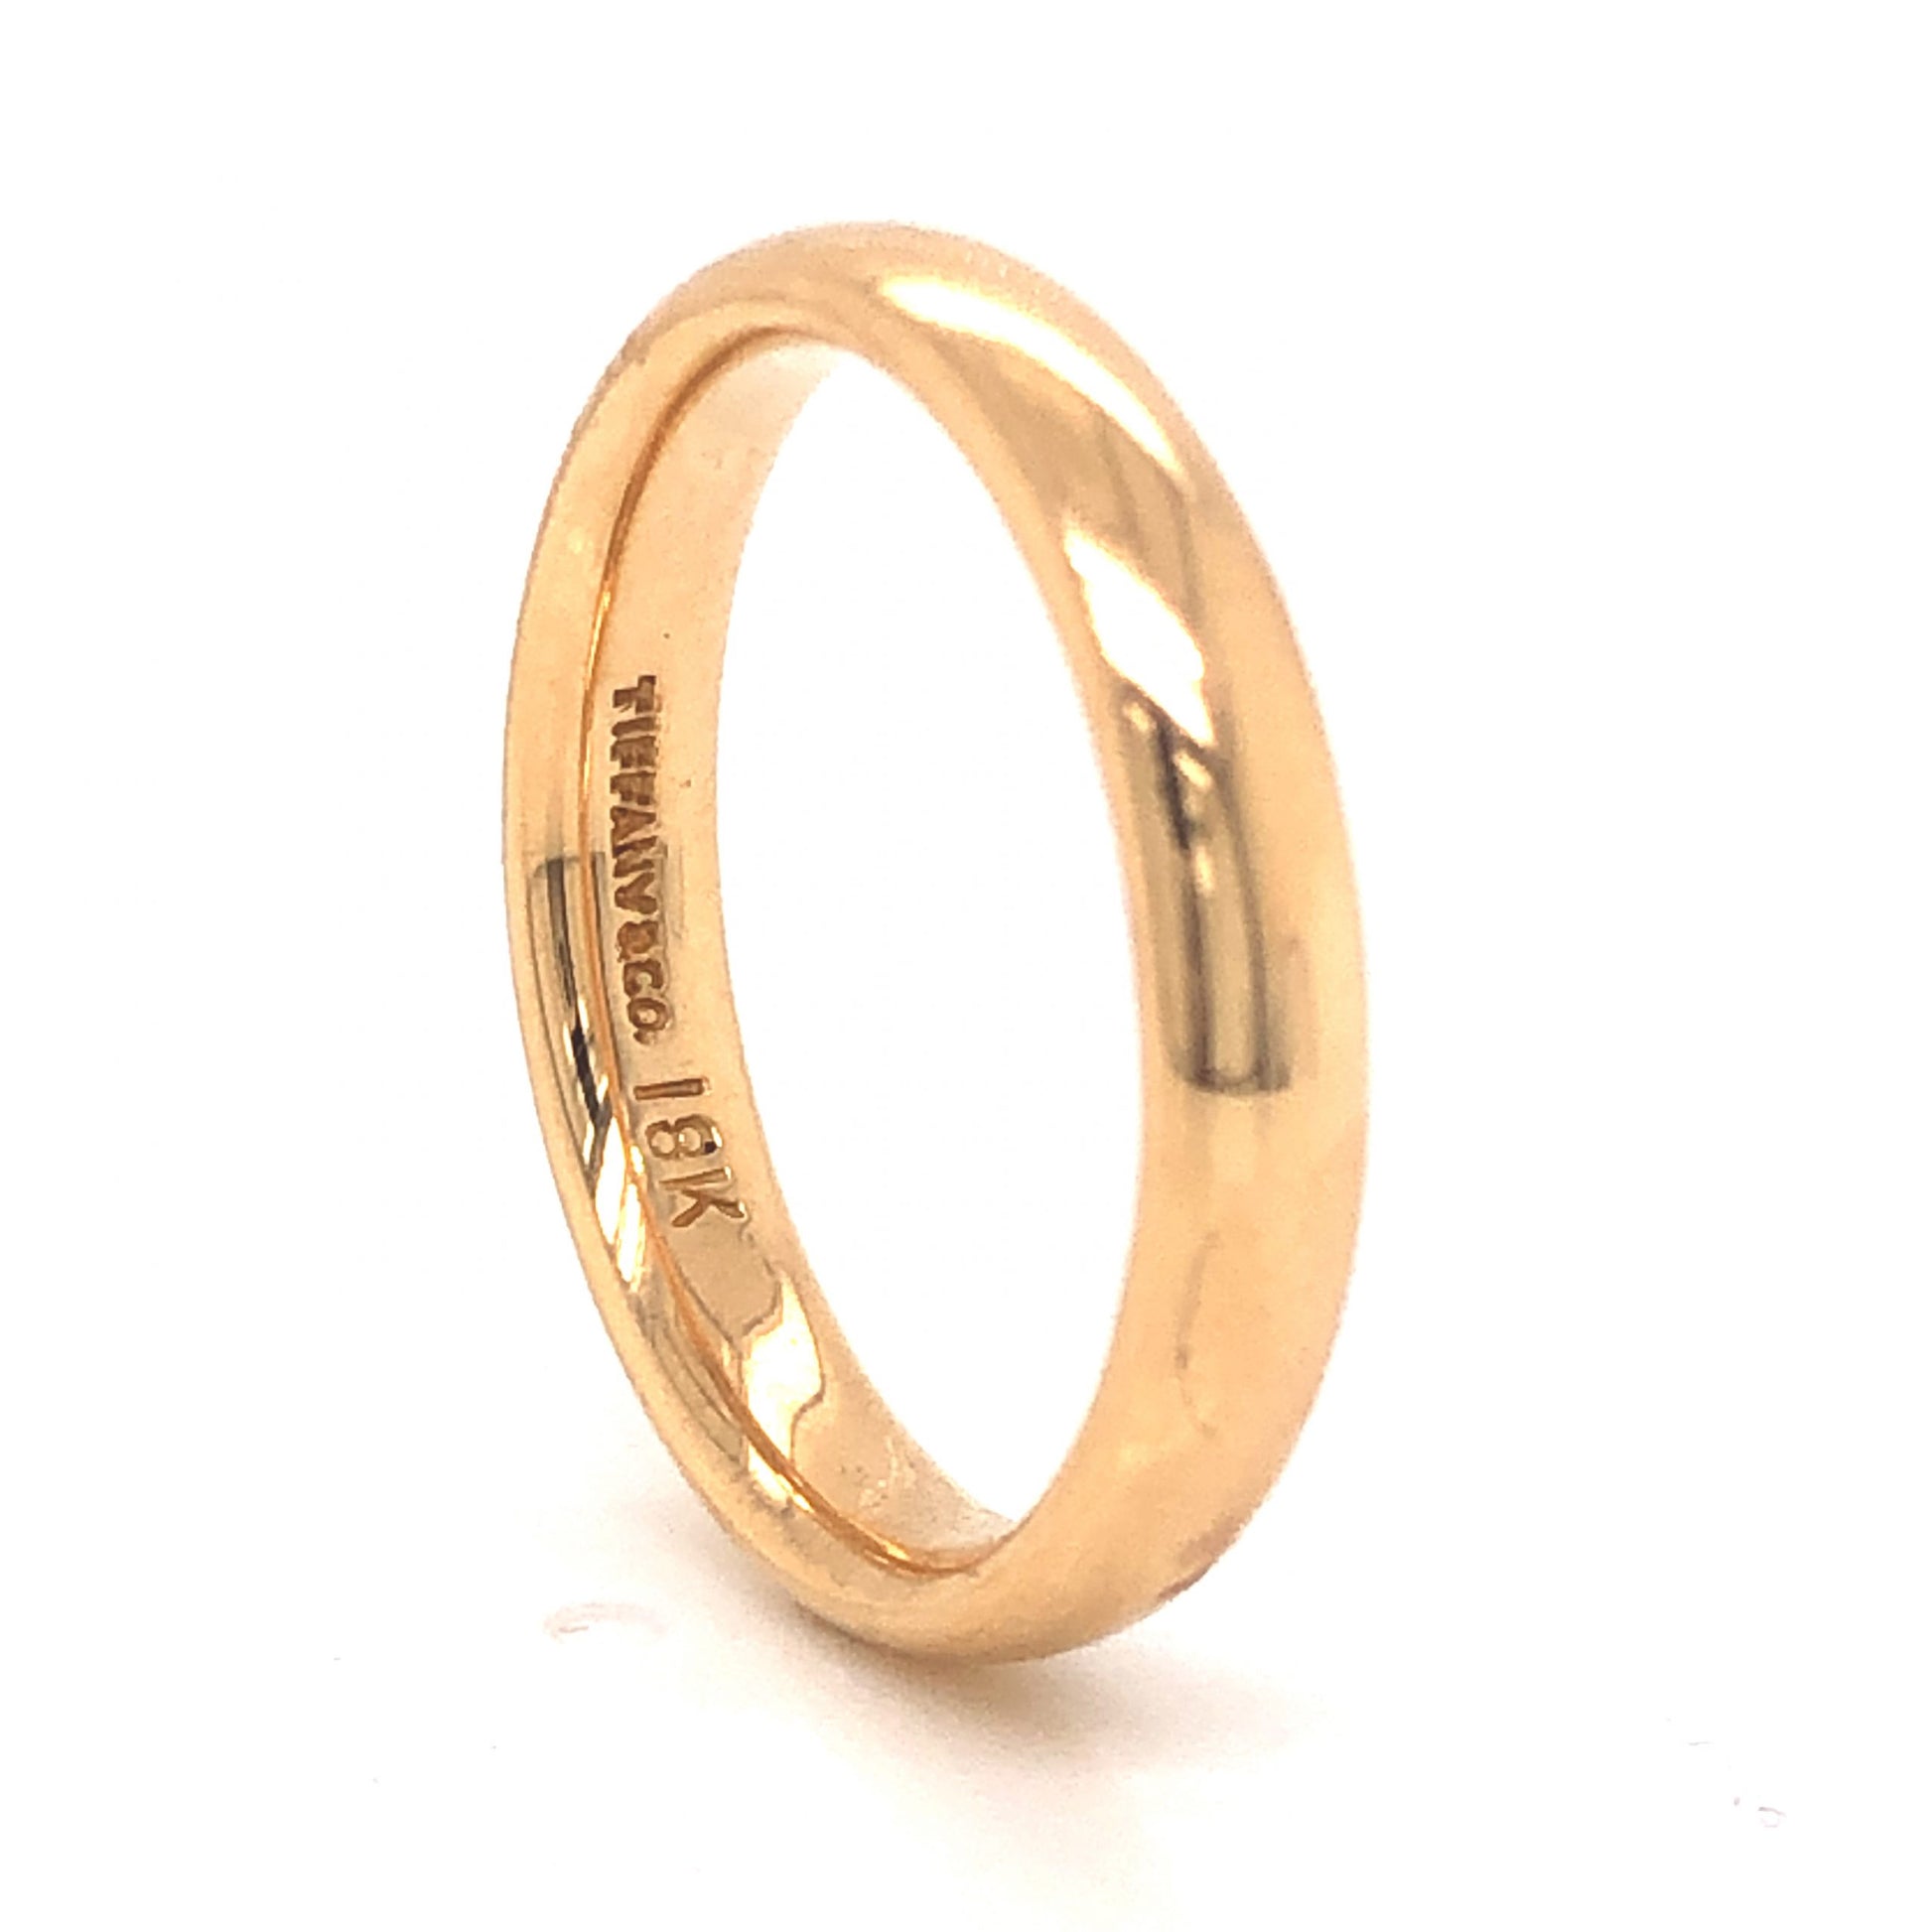 Tiffany & Co. Modern Wedding Band in 18k Yellow GoldComposition: 18 Karat Yellow GoldRing Size: 6.75Total Gram Weight: 4.8 gInscription: Tiffany & Co. 18k